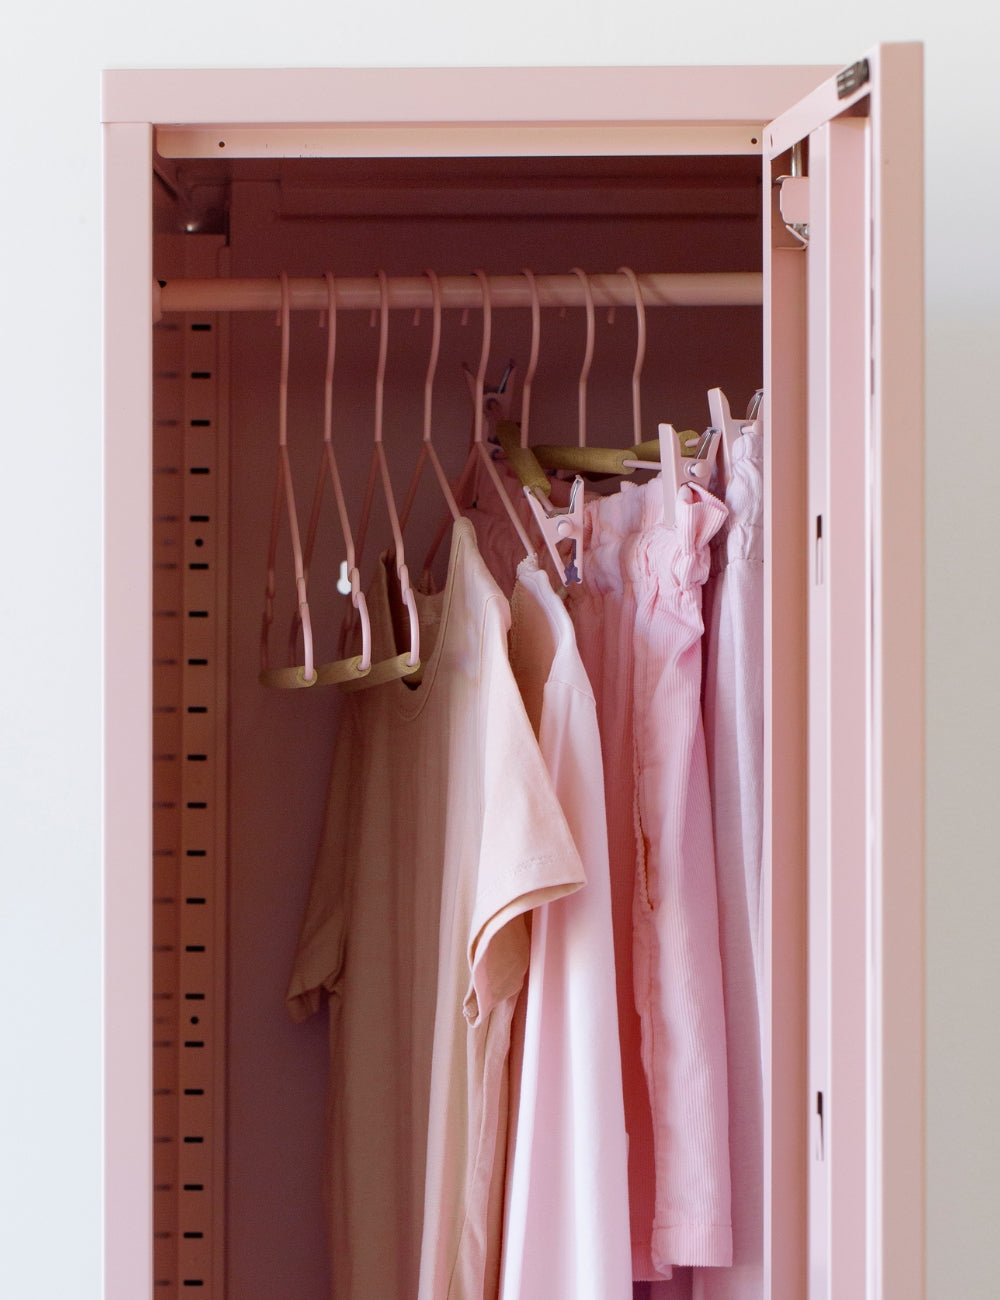 Adult Top Hangers in Blush